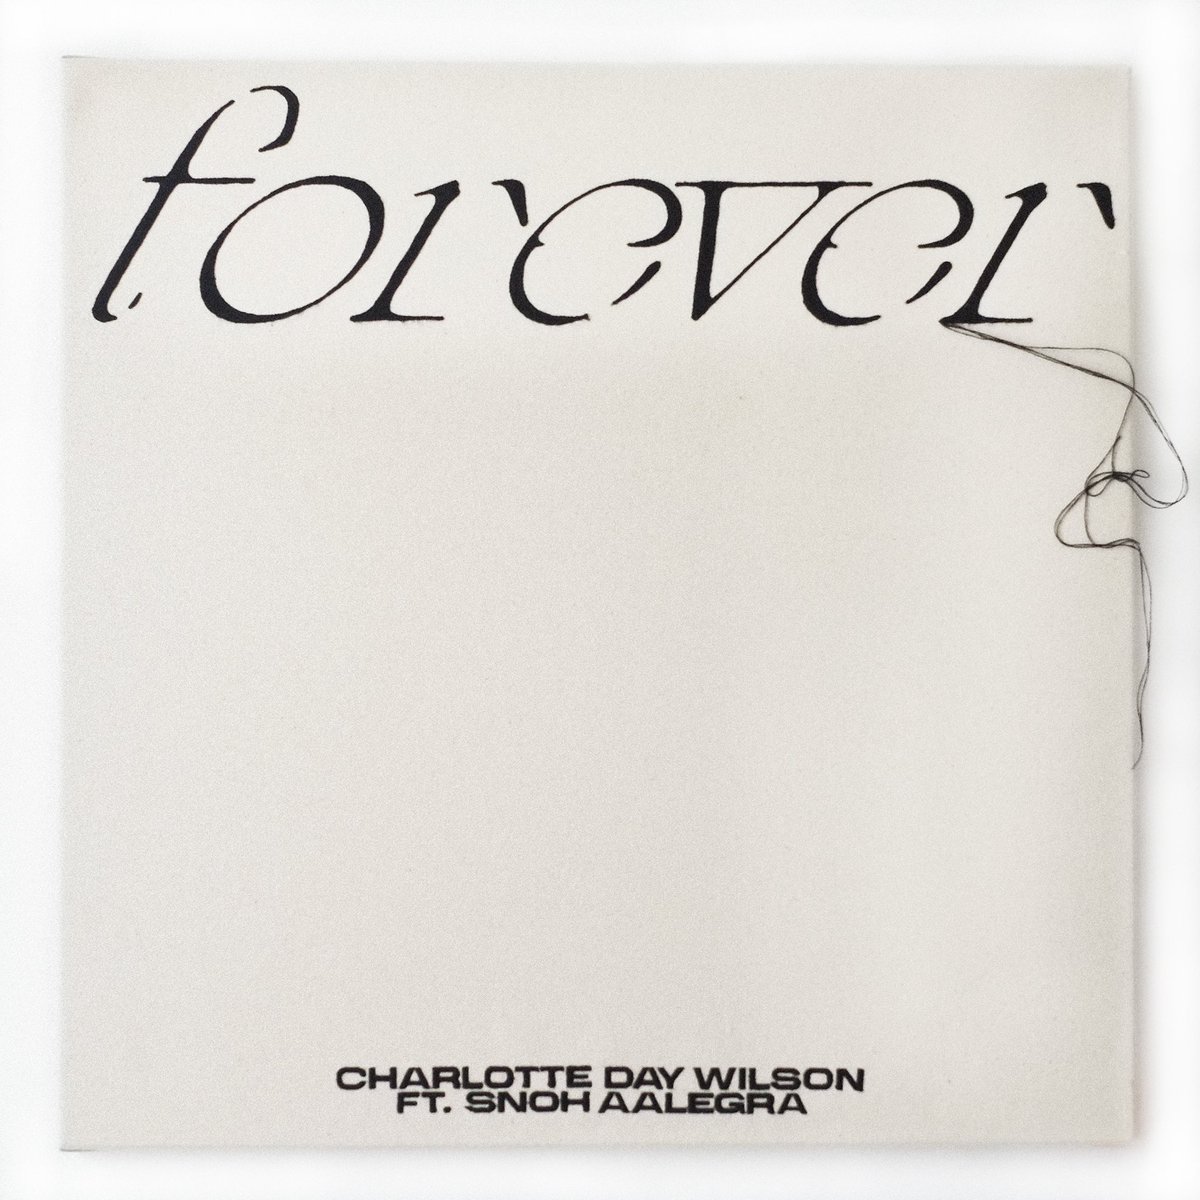 Forever feat. @snohaalegra 🪡 Out now everywhere. charlottedaywilson.ffm.to/forever